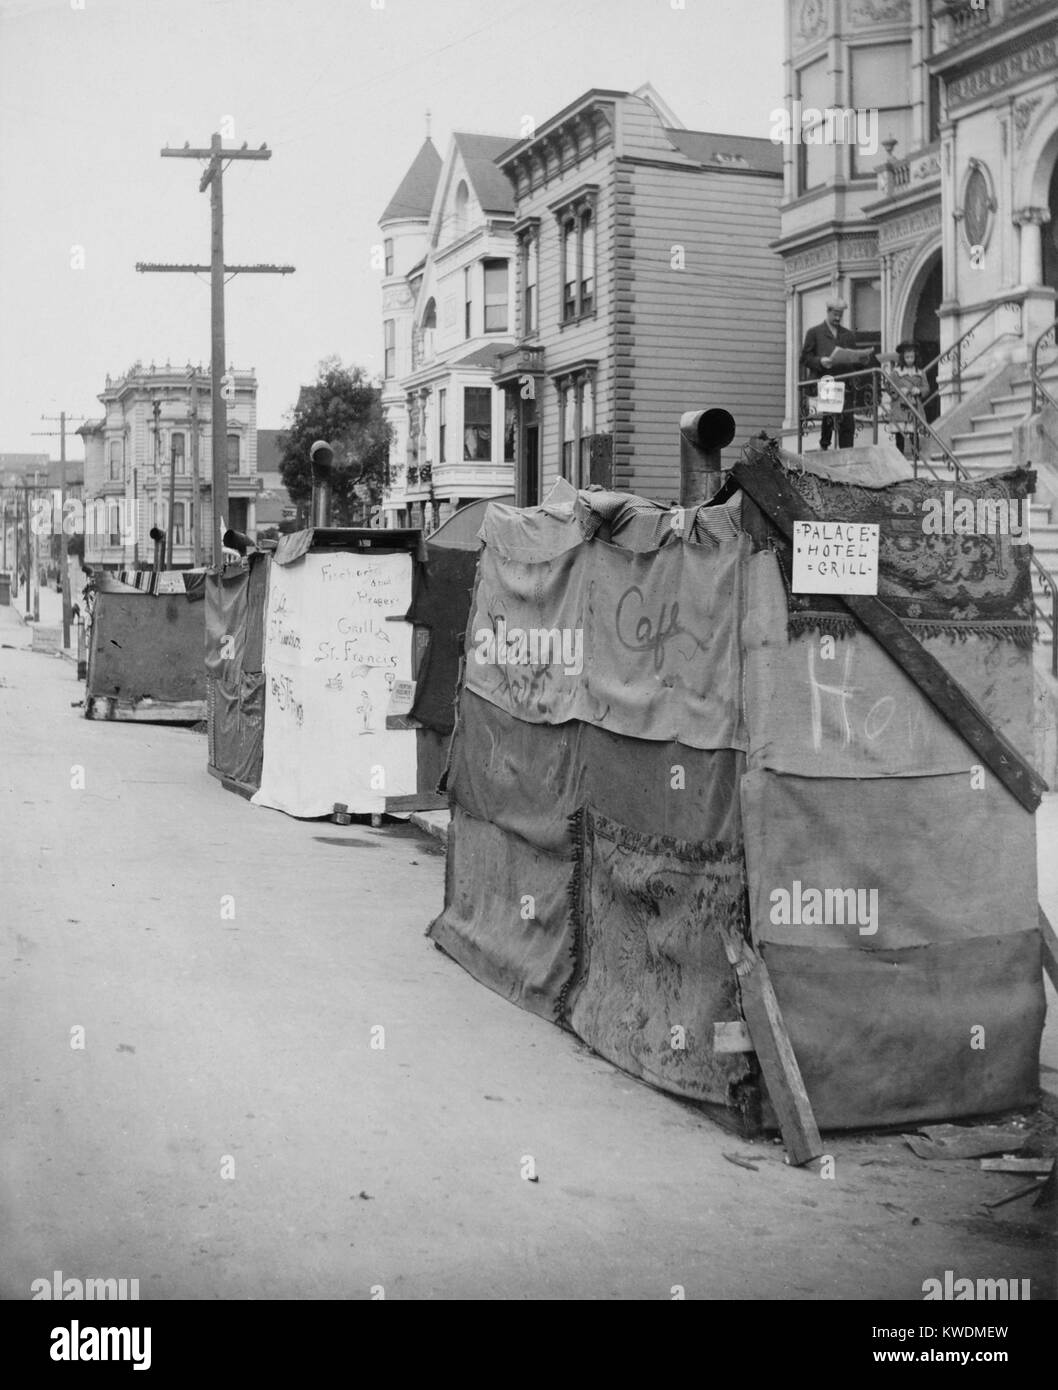 Temporary shelters in street after the April 18, 1906 San Francisco, earthquake and 3-day fire. A hand written sign identified the burlap and rug-covered hovel as the Palace Hotel Grill. A man stands reading a newspaper on his front steps of his intact home. People could live in their stable homes, but could not cook inside until houses were inspected for gas leaks that would case explosions and/or fires. (BSLOC 2017 17 47) Stock Photo